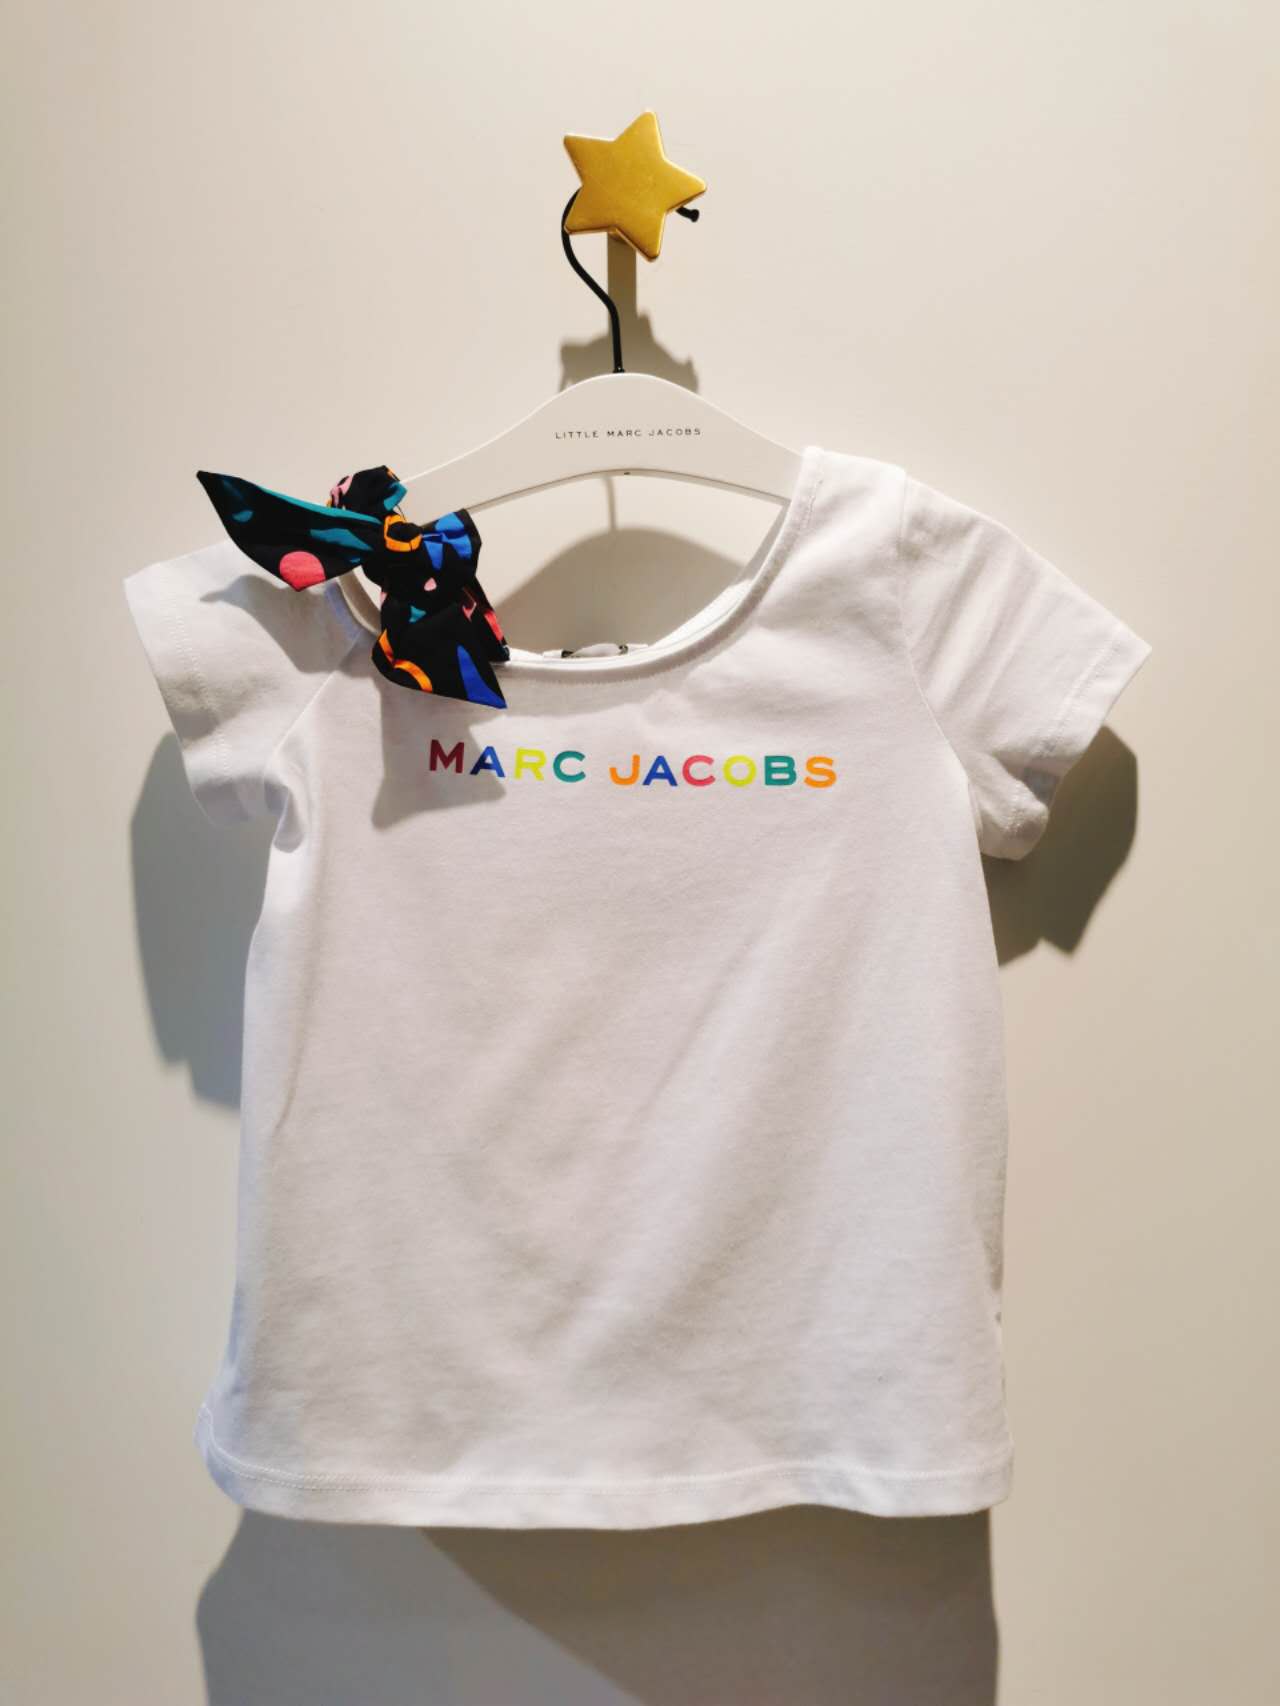 The Marc Jacobs Strap Knot T shirt